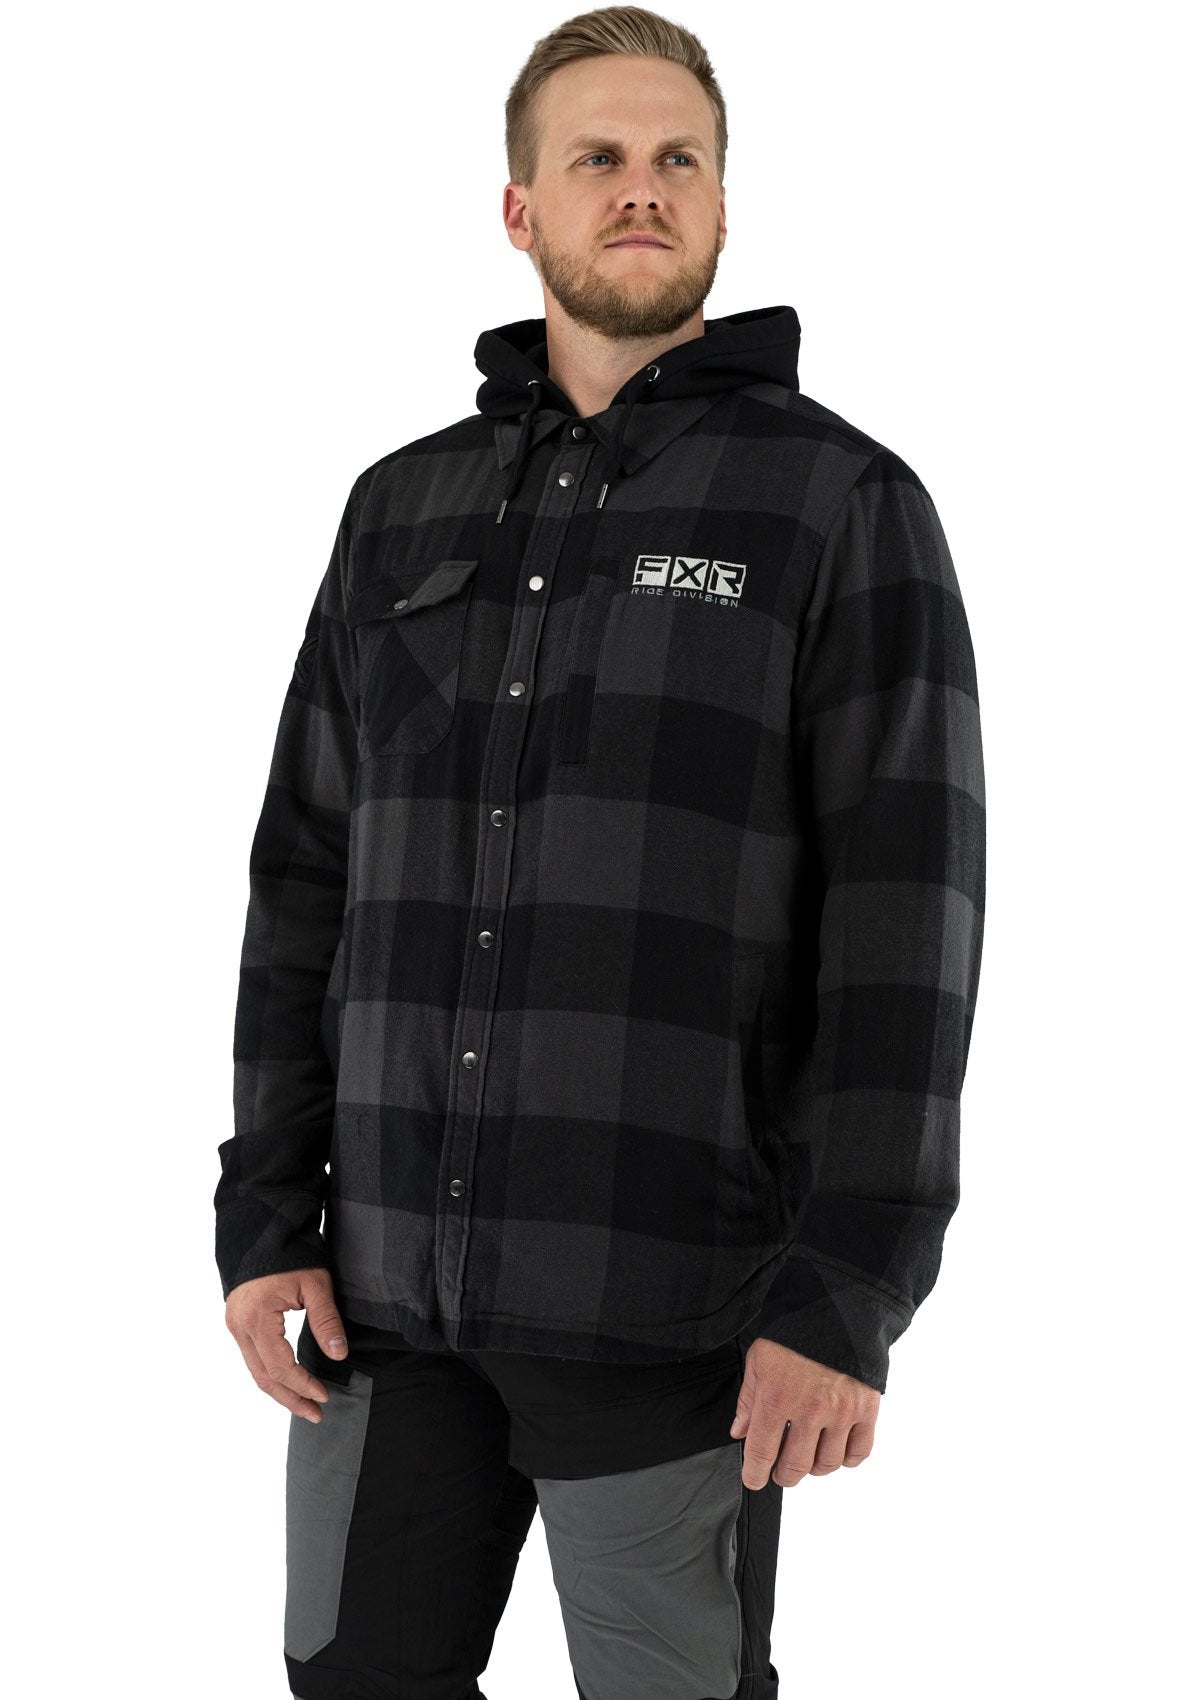 FXR Men's Timber Insulated Flannel Jacket 21